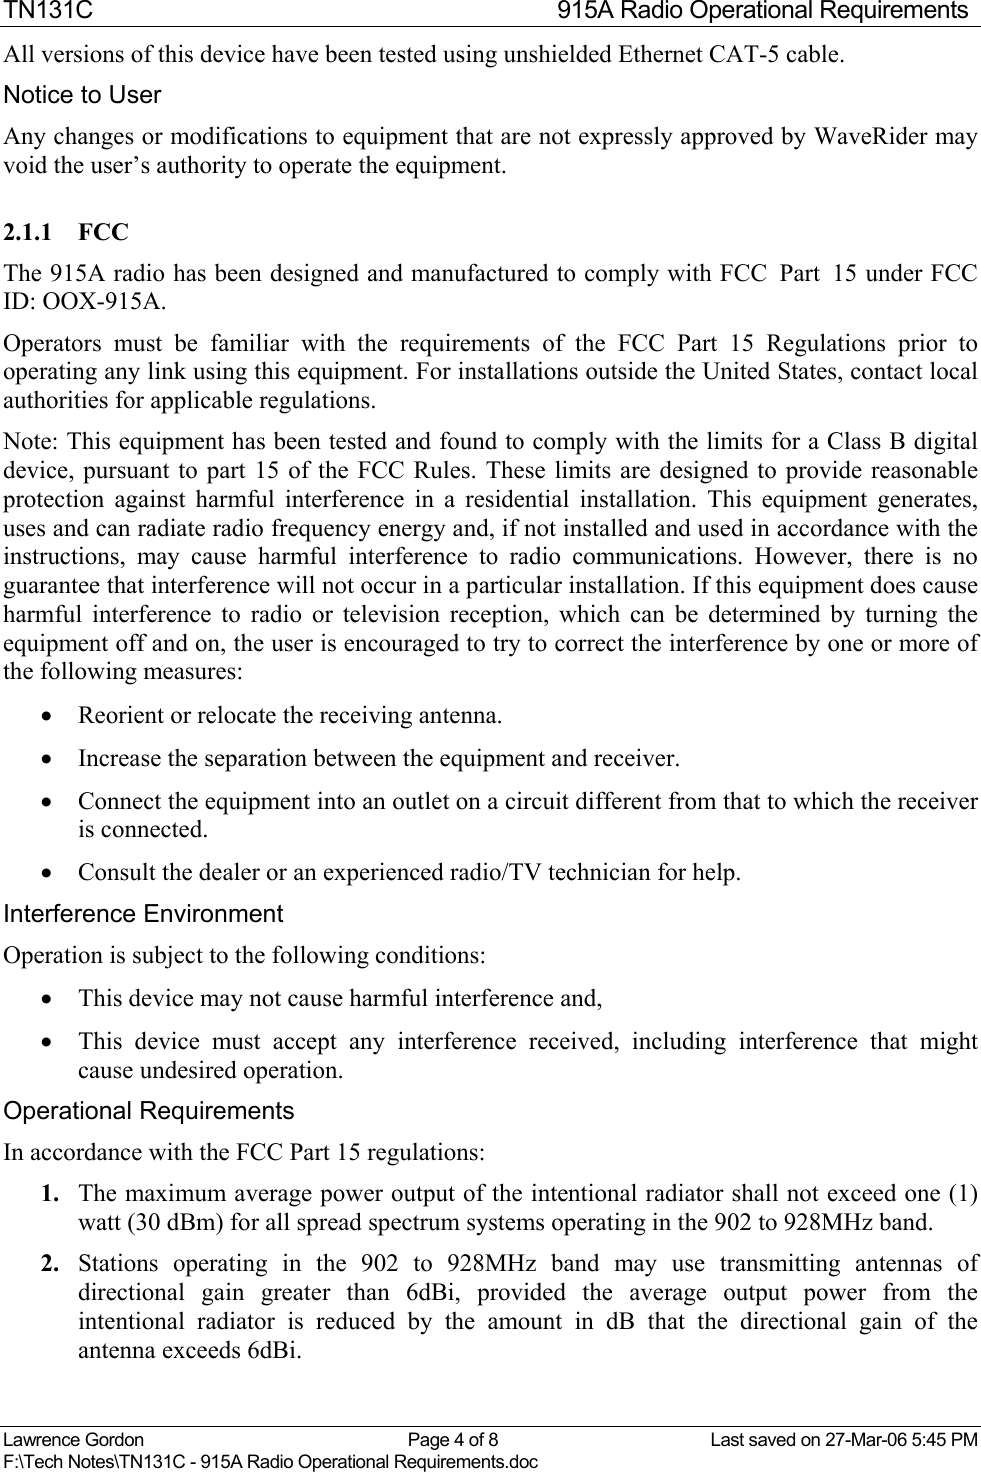 TN131C  915A Radio Operational Requirements Lawrence Gordon  Page 4 of 8  Last saved on 27-Mar-06 5:45 PM F:\Tech Notes\TN131C - 915A Radio Operational Requirements.doc   All versions of this device have been tested using unshielded Ethernet CAT-5 cable.  Notice to User Any changes or modifications to equipment that are not expressly approved by WaveRider may void the user’s authority to operate the equipment. 2.1.1 FCC The 915A radio has been designed and manufactured to comply with FCC  Part  15 under FCC ID: OOX-915A. Operators must be familiar with the requirements of the FCC Part 15 Regulations prior to operating any link using this equipment. For installations outside the United States, contact local authorities for applicable regulations. Note: This equipment has been tested and found to comply with the limits for a Class B digital device, pursuant to part 15 of the FCC Rules. These limits are designed to provide reasonable protection against harmful interference in a residential installation. This equipment generates, uses and can radiate radio frequency energy and, if not installed and used in accordance with the instructions, may cause harmful interference to radio communications. However, there is no guarantee that interference will not occur in a particular installation. If this equipment does cause harmful interference to radio or television reception, which can be determined by turning the equipment off and on, the user is encouraged to try to correct the interference by one or more of the following measures:  •  Reorient or relocate the receiving antenna.  •  Increase the separation between the equipment and receiver.  •  Connect the equipment into an outlet on a circuit different from that to which the receiver is connected.  •  Consult the dealer or an experienced radio/TV technician for help. Interference Environment Operation is subject to the following conditions: •  This device may not cause harmful interference and, •  This device must accept any interference received, including interference that might cause undesired operation. Operational Requirements In accordance with the FCC Part 15 regulations: 1.  The maximum average power output of the intentional radiator shall not exceed one (1) watt (30 dBm) for all spread spectrum systems operating in the 902 to 928MHz band. 2.  Stations operating in the 902 to 928MHz band may use transmitting antennas of directional gain greater than 6dBi, provided the average output power from the intentional radiator is reduced by the amount in dB that the directional gain of the antenna exceeds 6dBi. 